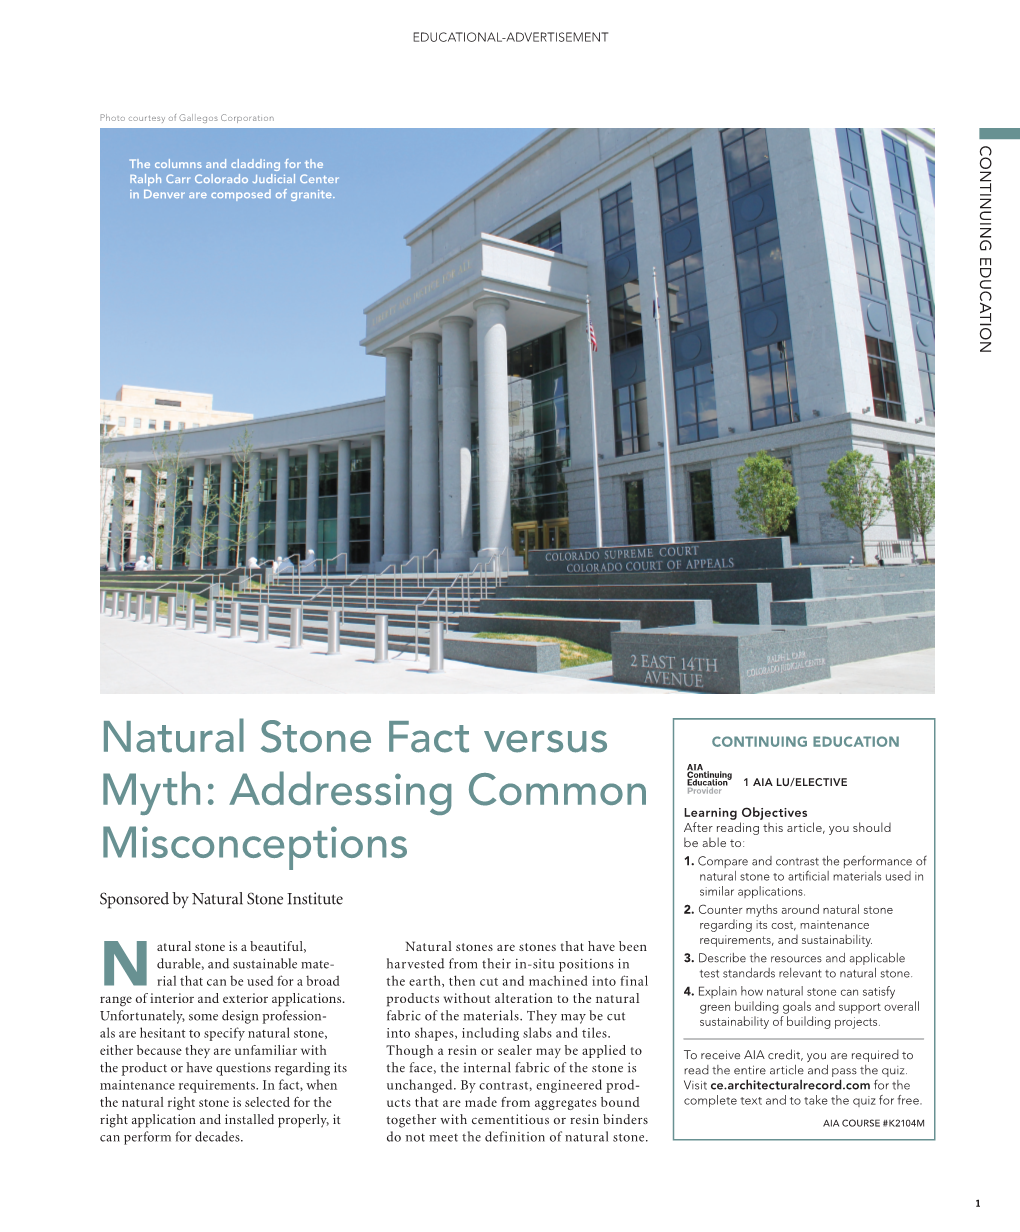 Natural Stone Fact Versus Myth: Addressing Common Misconceptions Educational-Advertisement